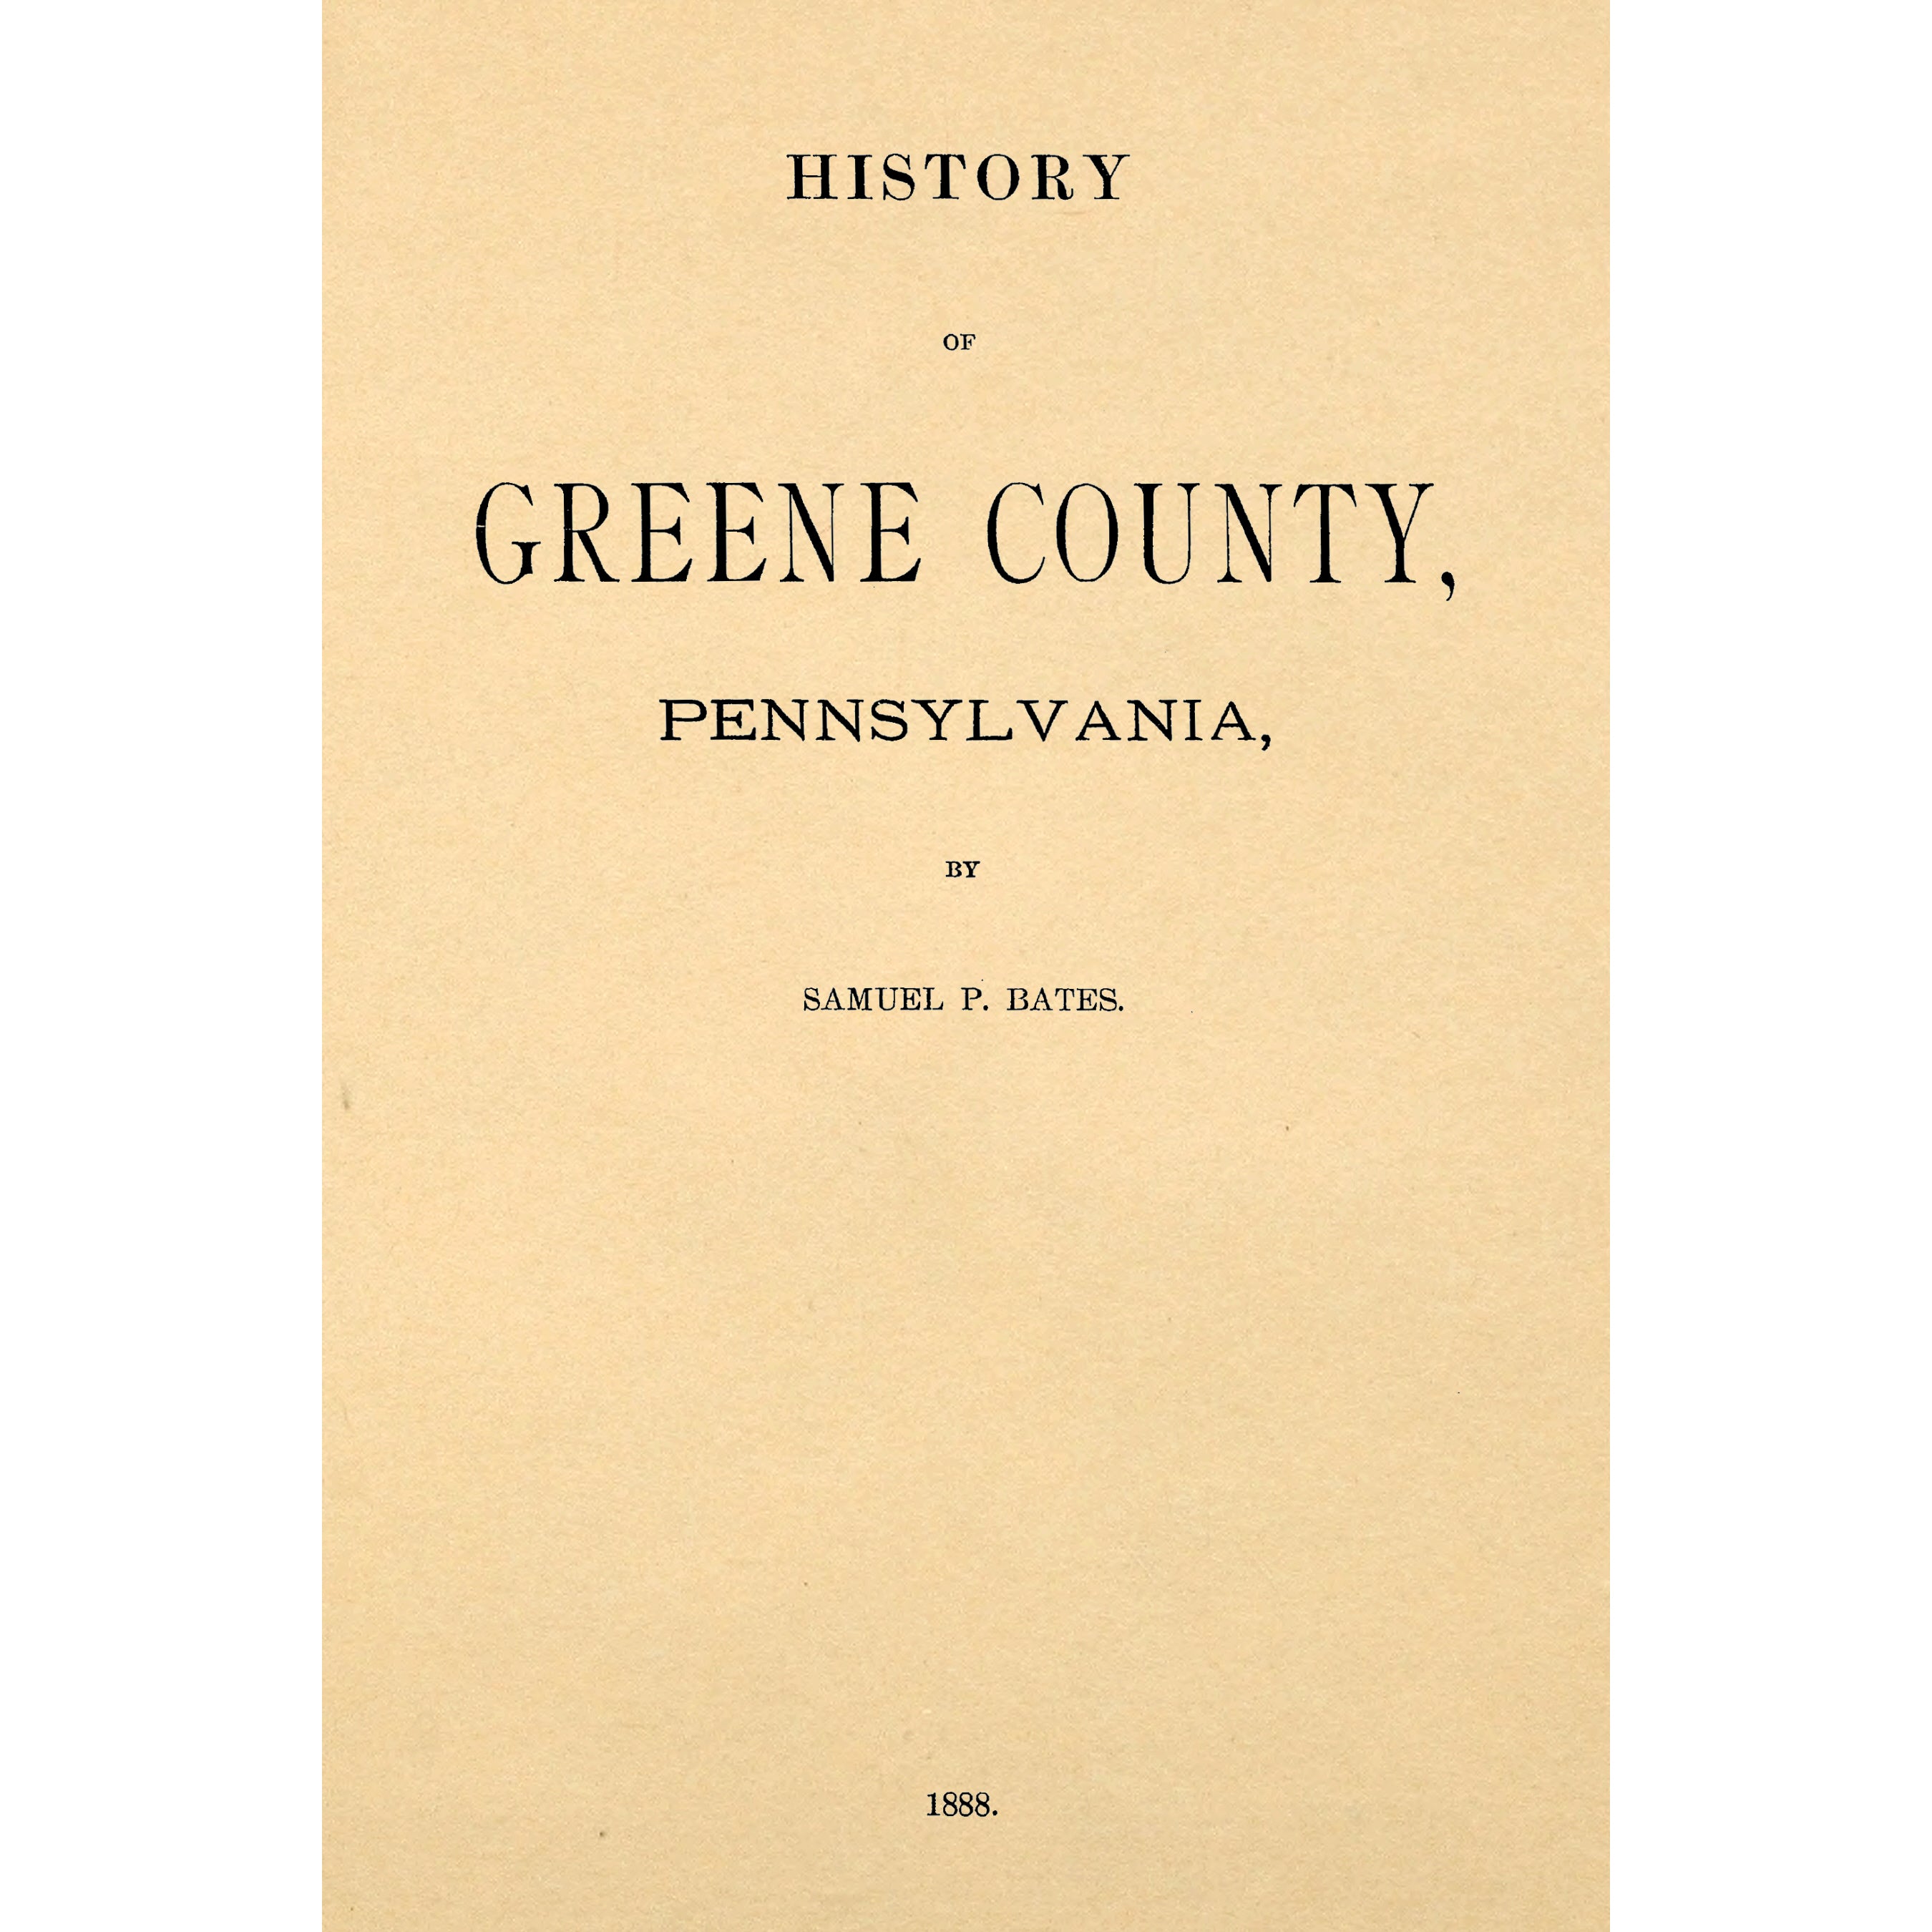 History of Greene County, Pennsylvania - Biographical Section